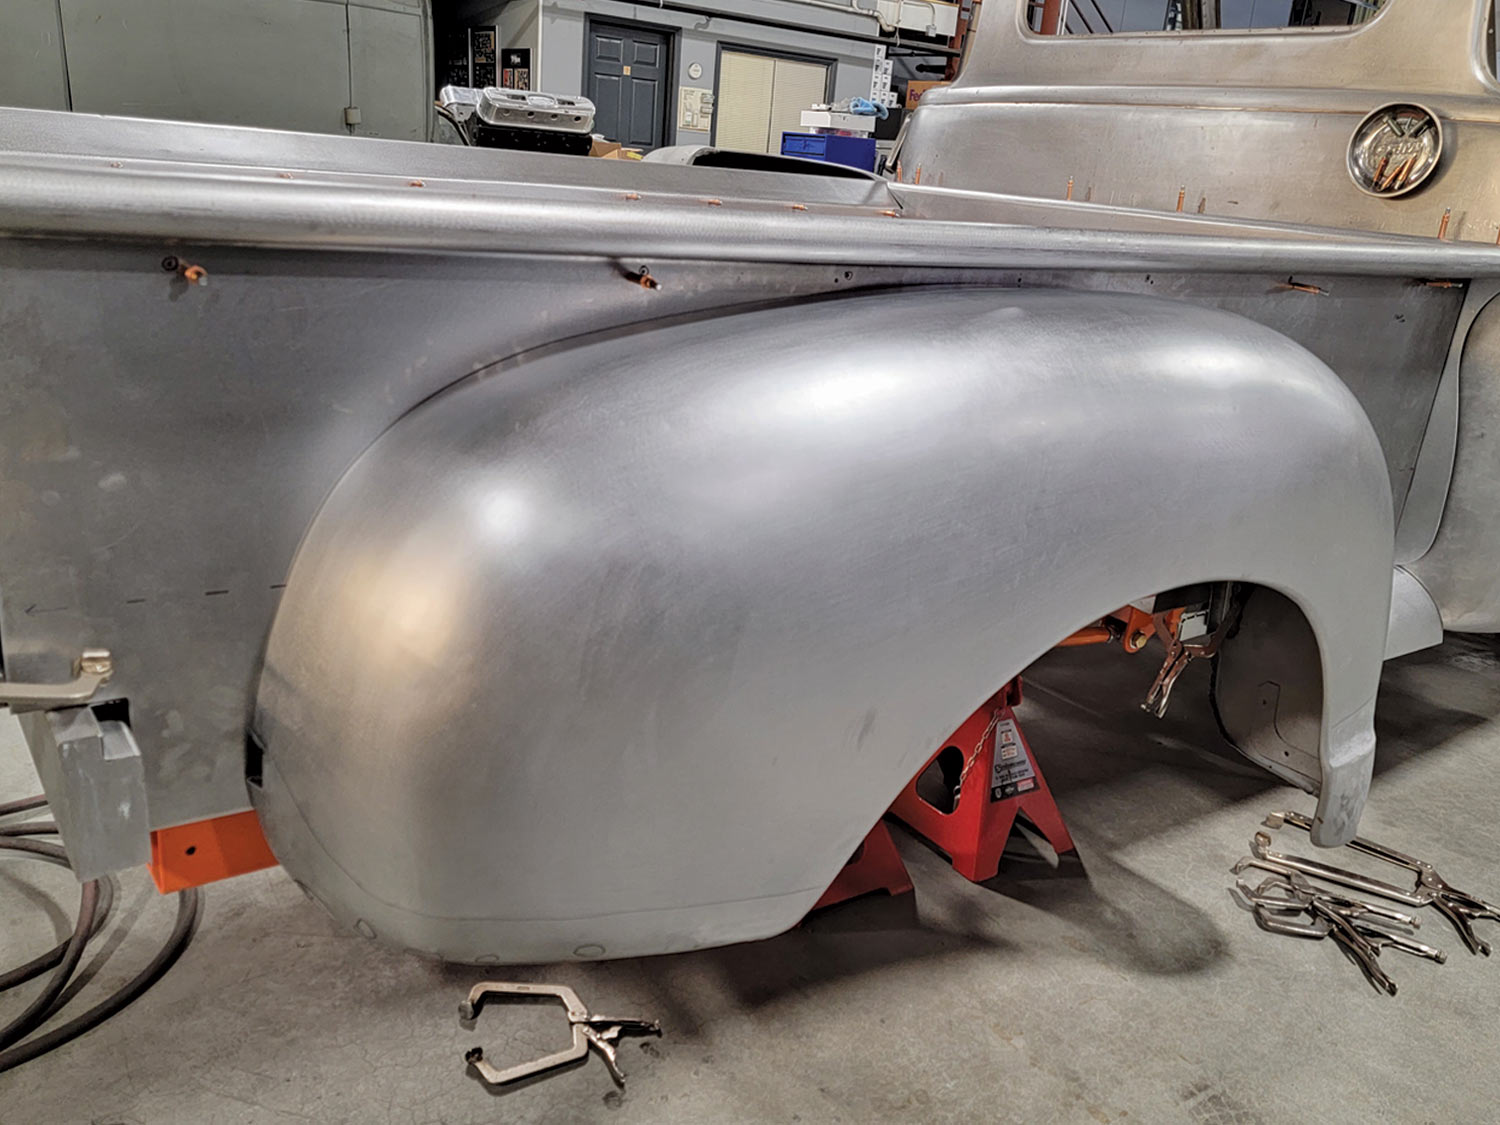 back view of the passenger side rear fender installed on the truck